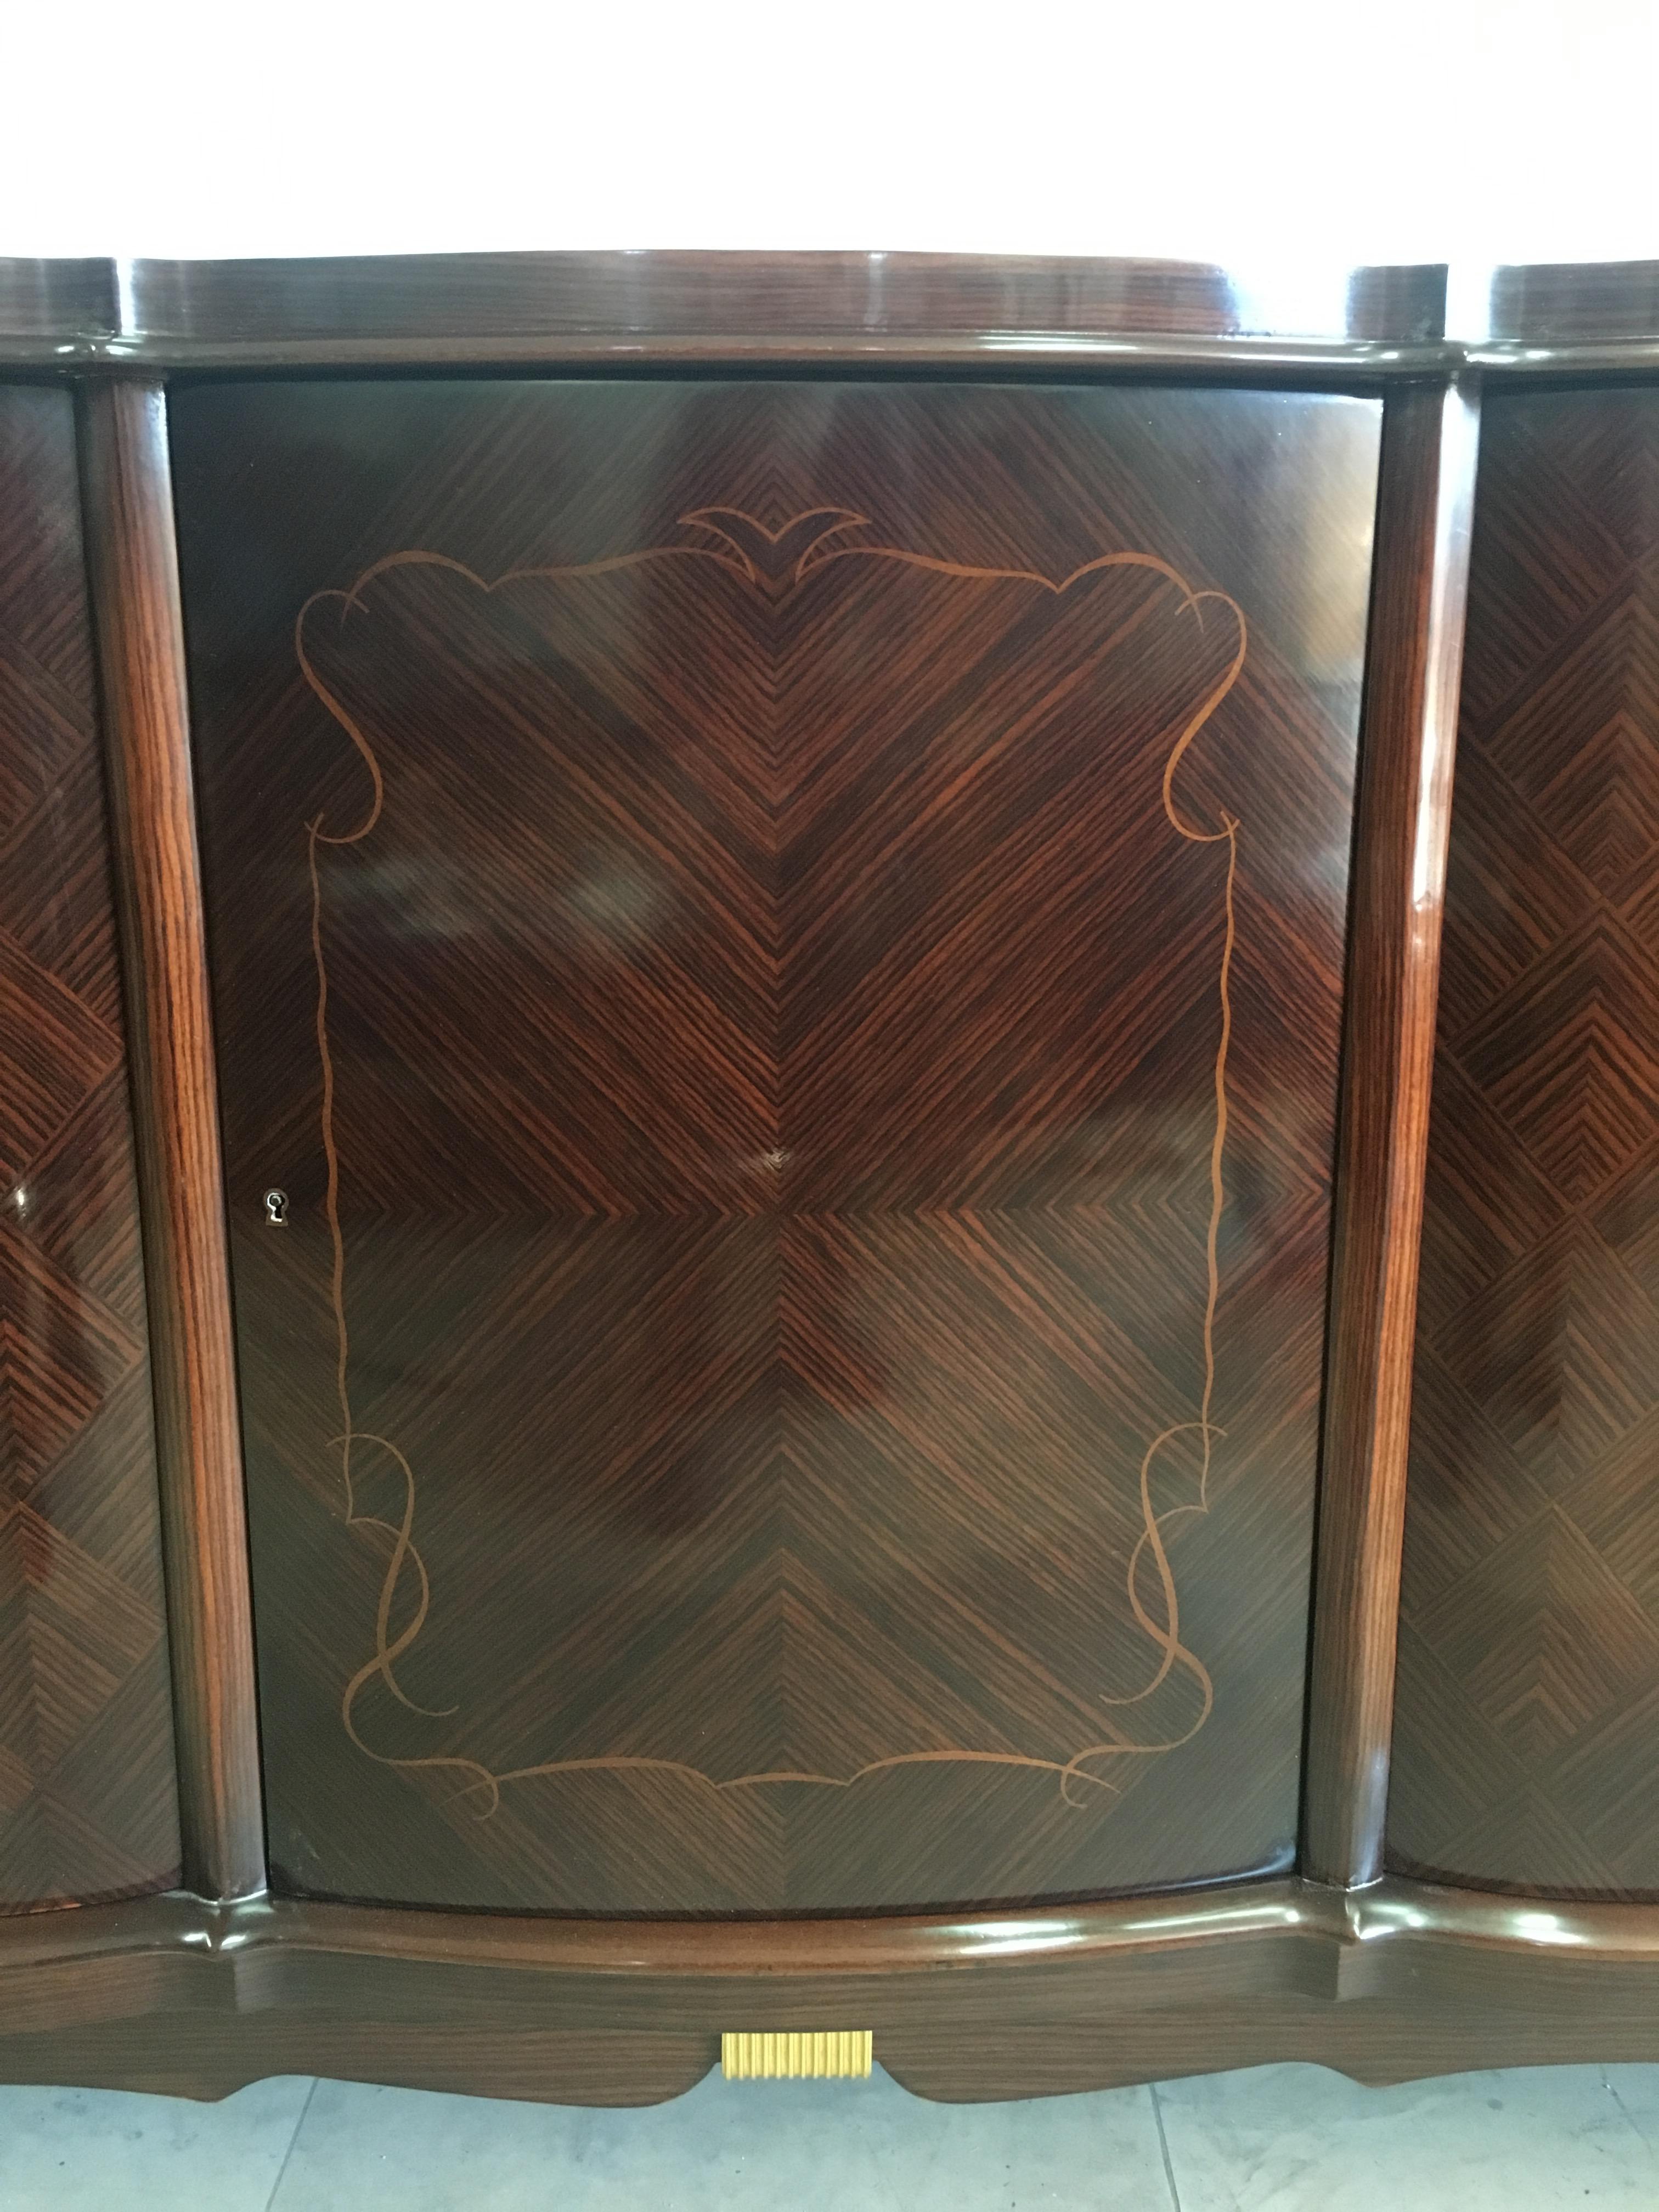 Art Deco French Buffet, circa 1940 in Matchbook Pattern Rosewood  For Sale 4